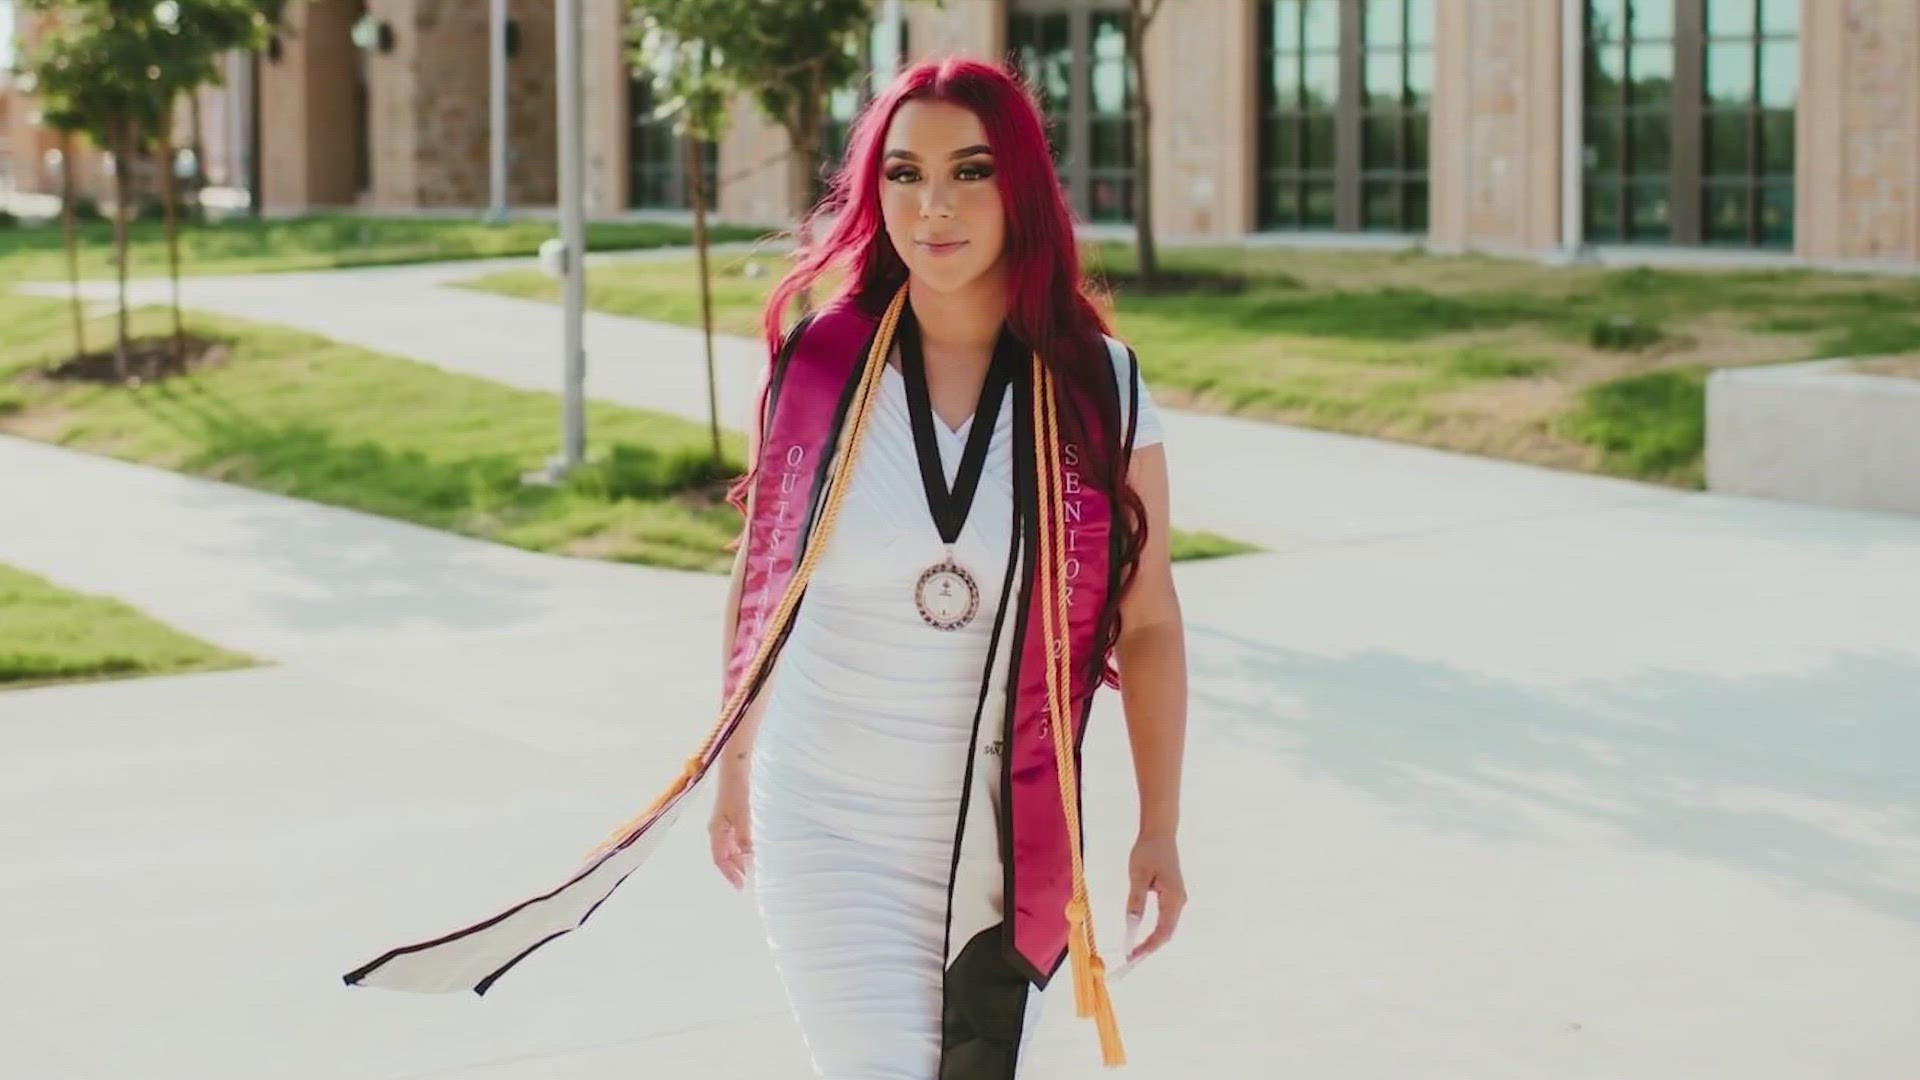 From child welfare to college graduate, 23-year-old Michelle Calleros wants to inspire others from a similar background.